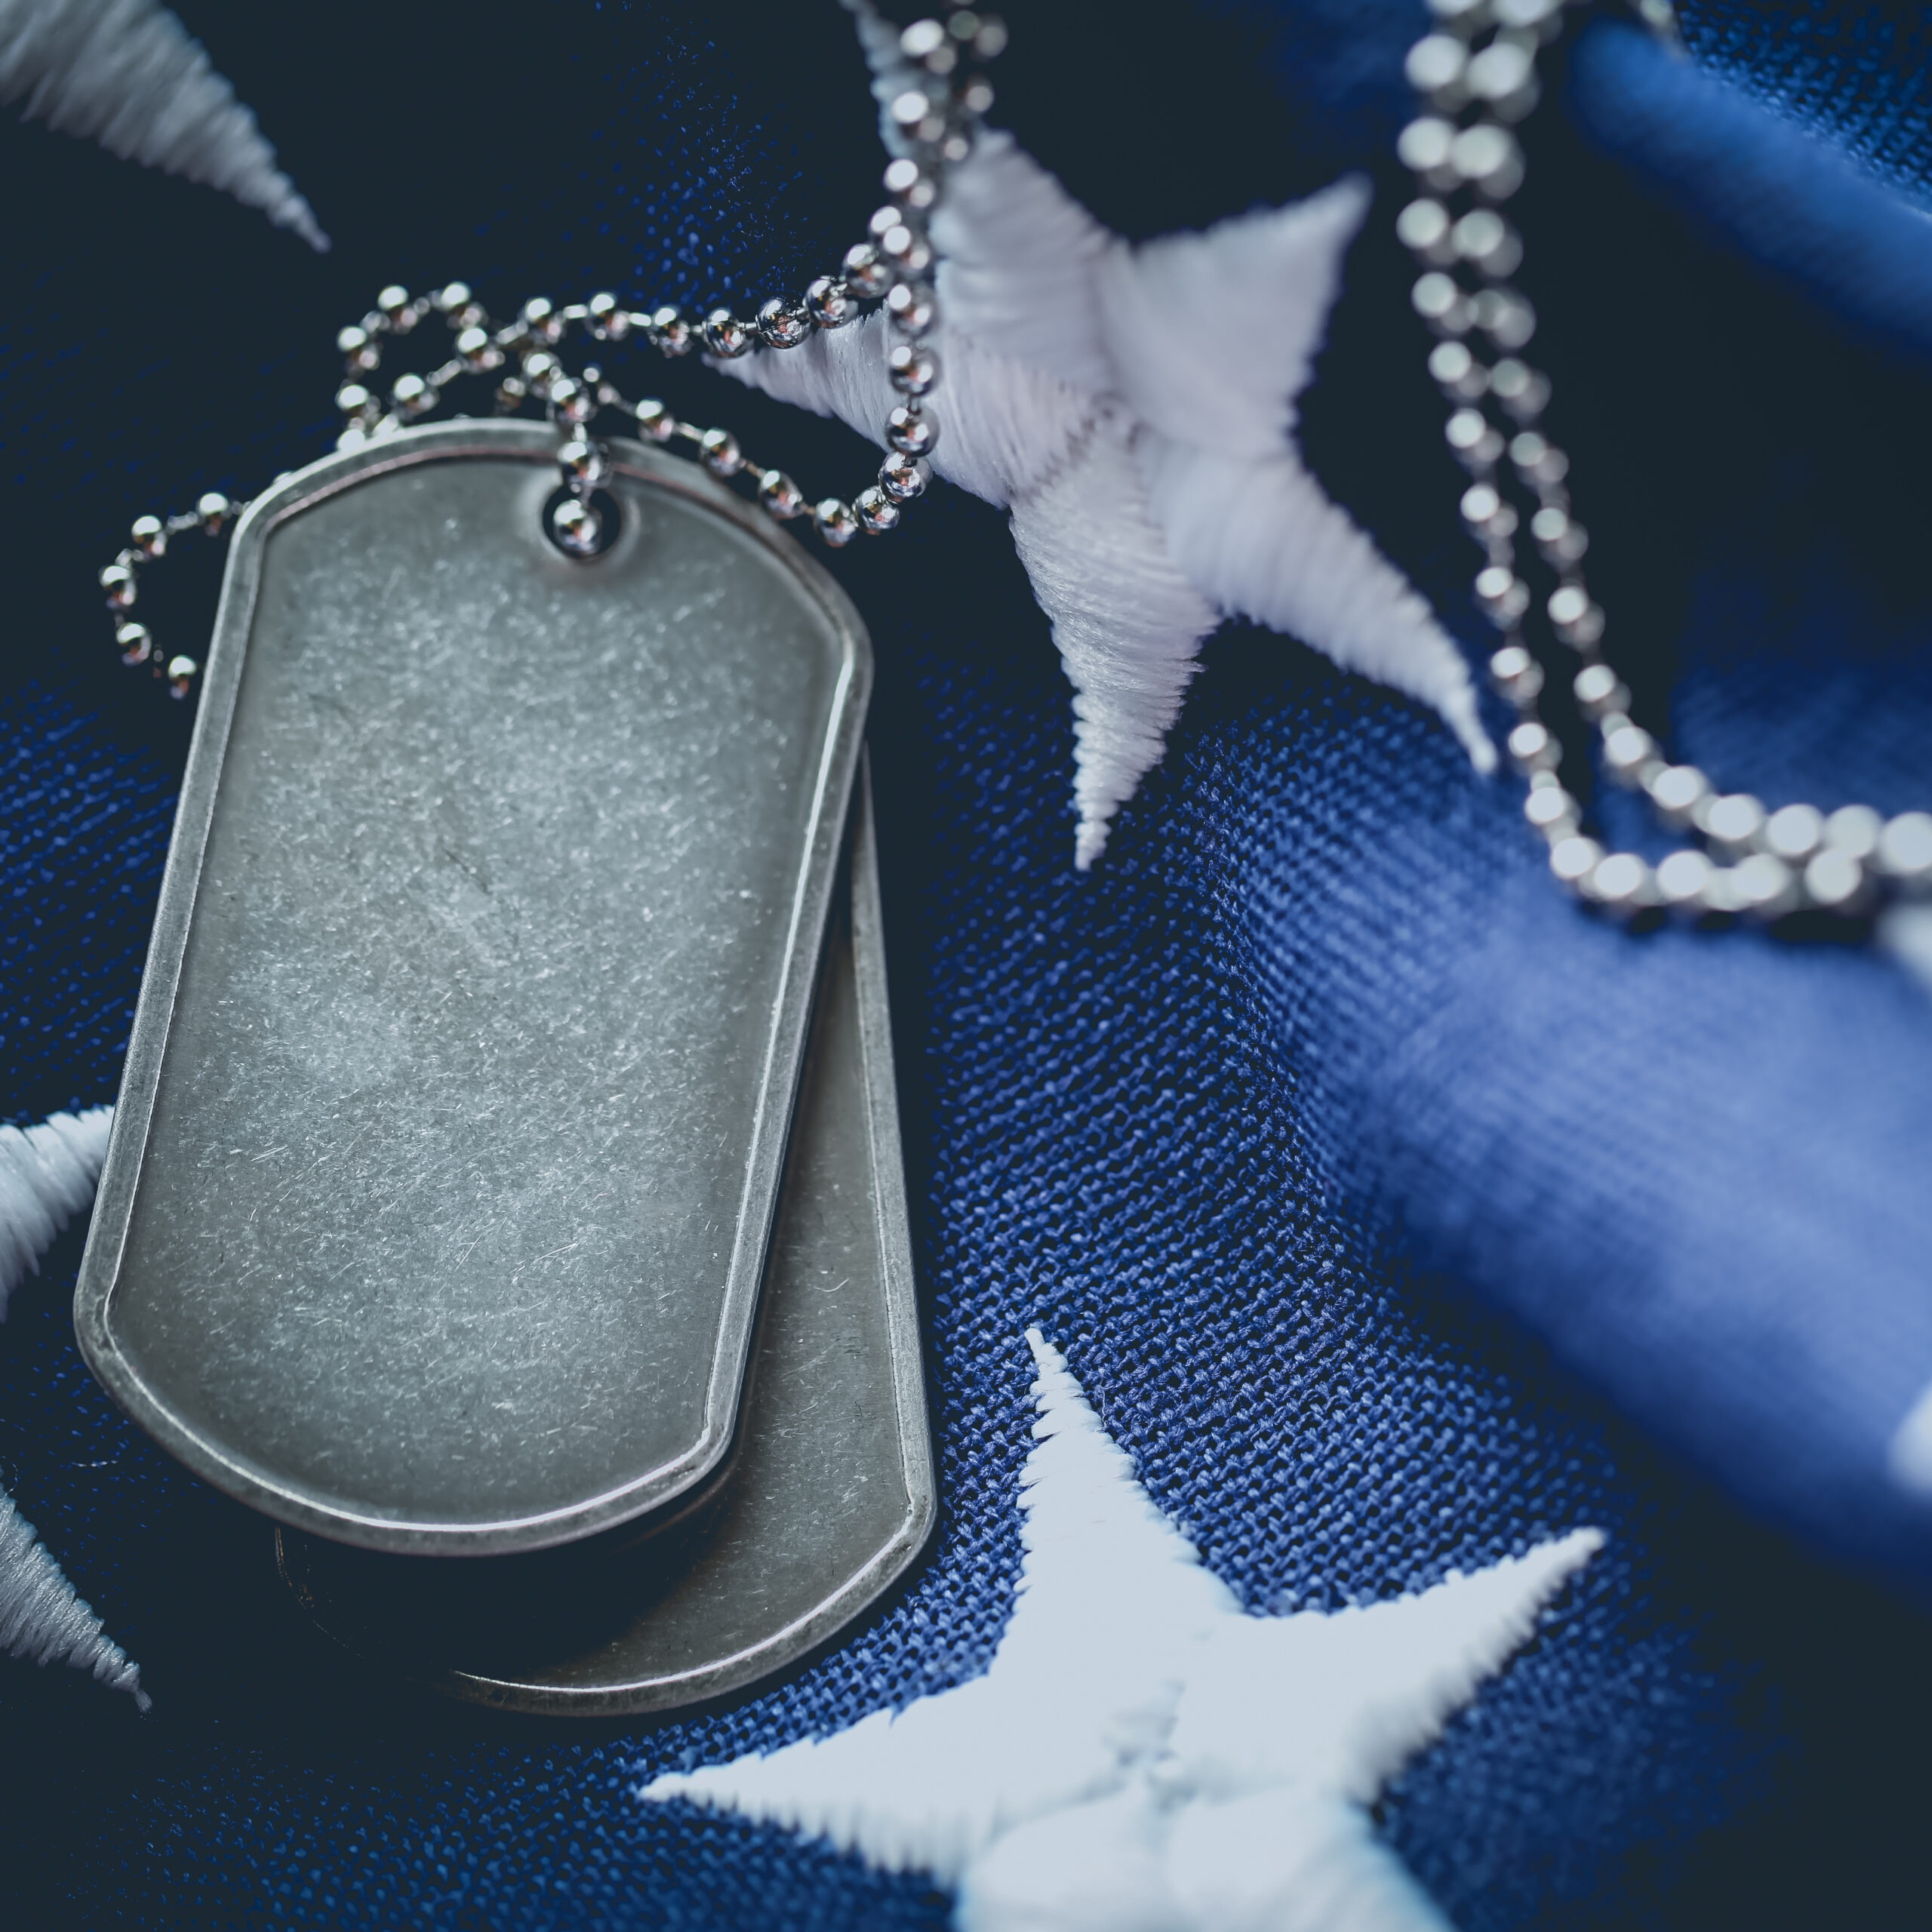 Worn USA military dog tags close up on US American flag with blank space for text